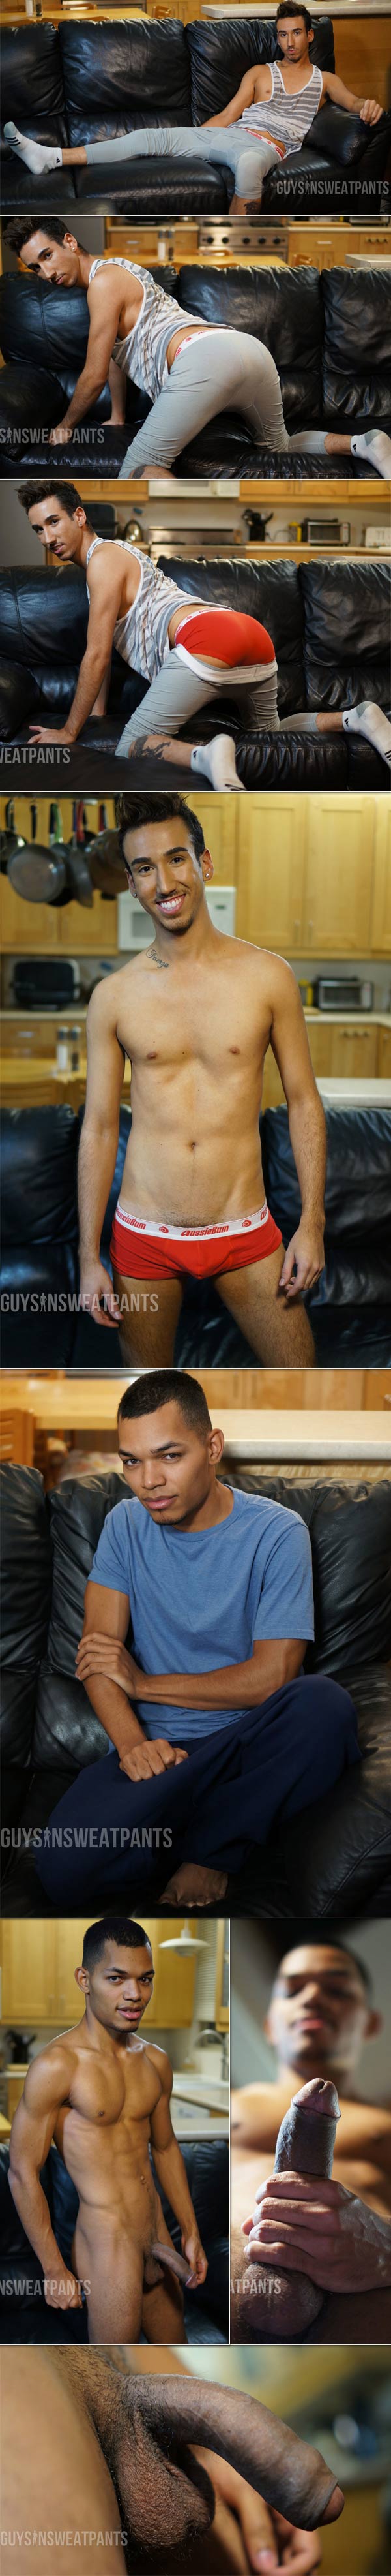 So, One Thing Leads To Another... (Adriano Luna & Nick Parker) at Guys In Sweatpants